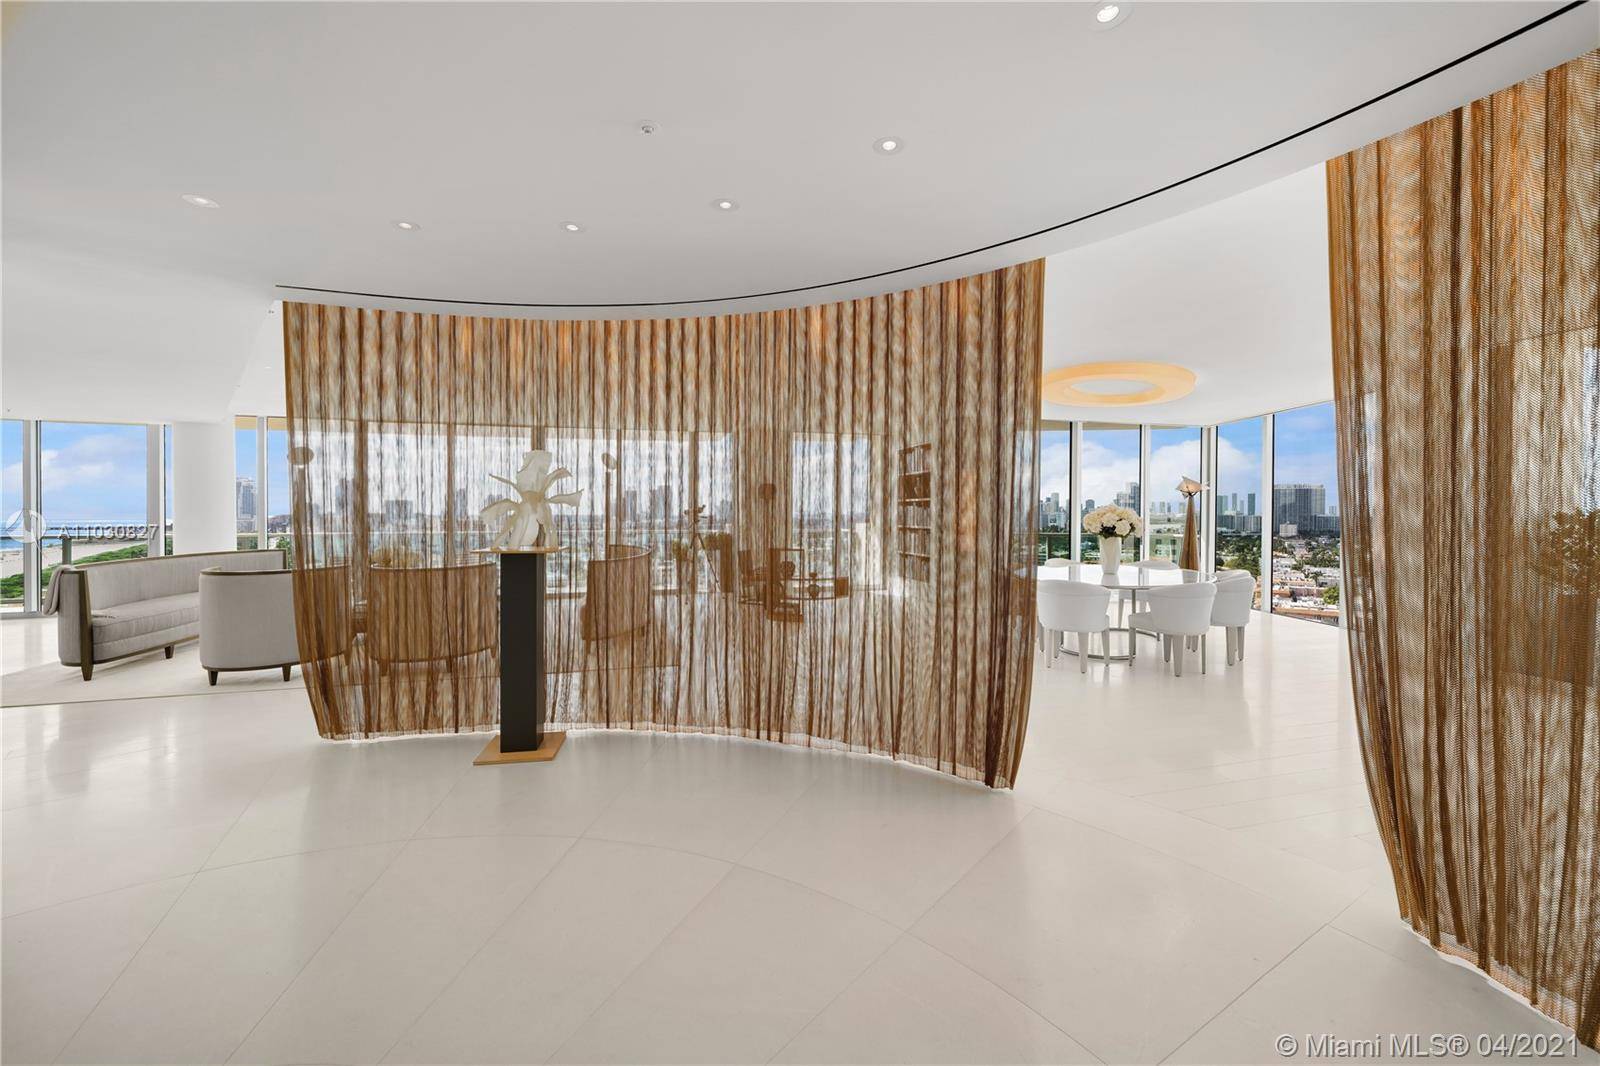 Amazing opportunity to rent an extraordinary Penthouse in one of the finest Buildings in Miami.